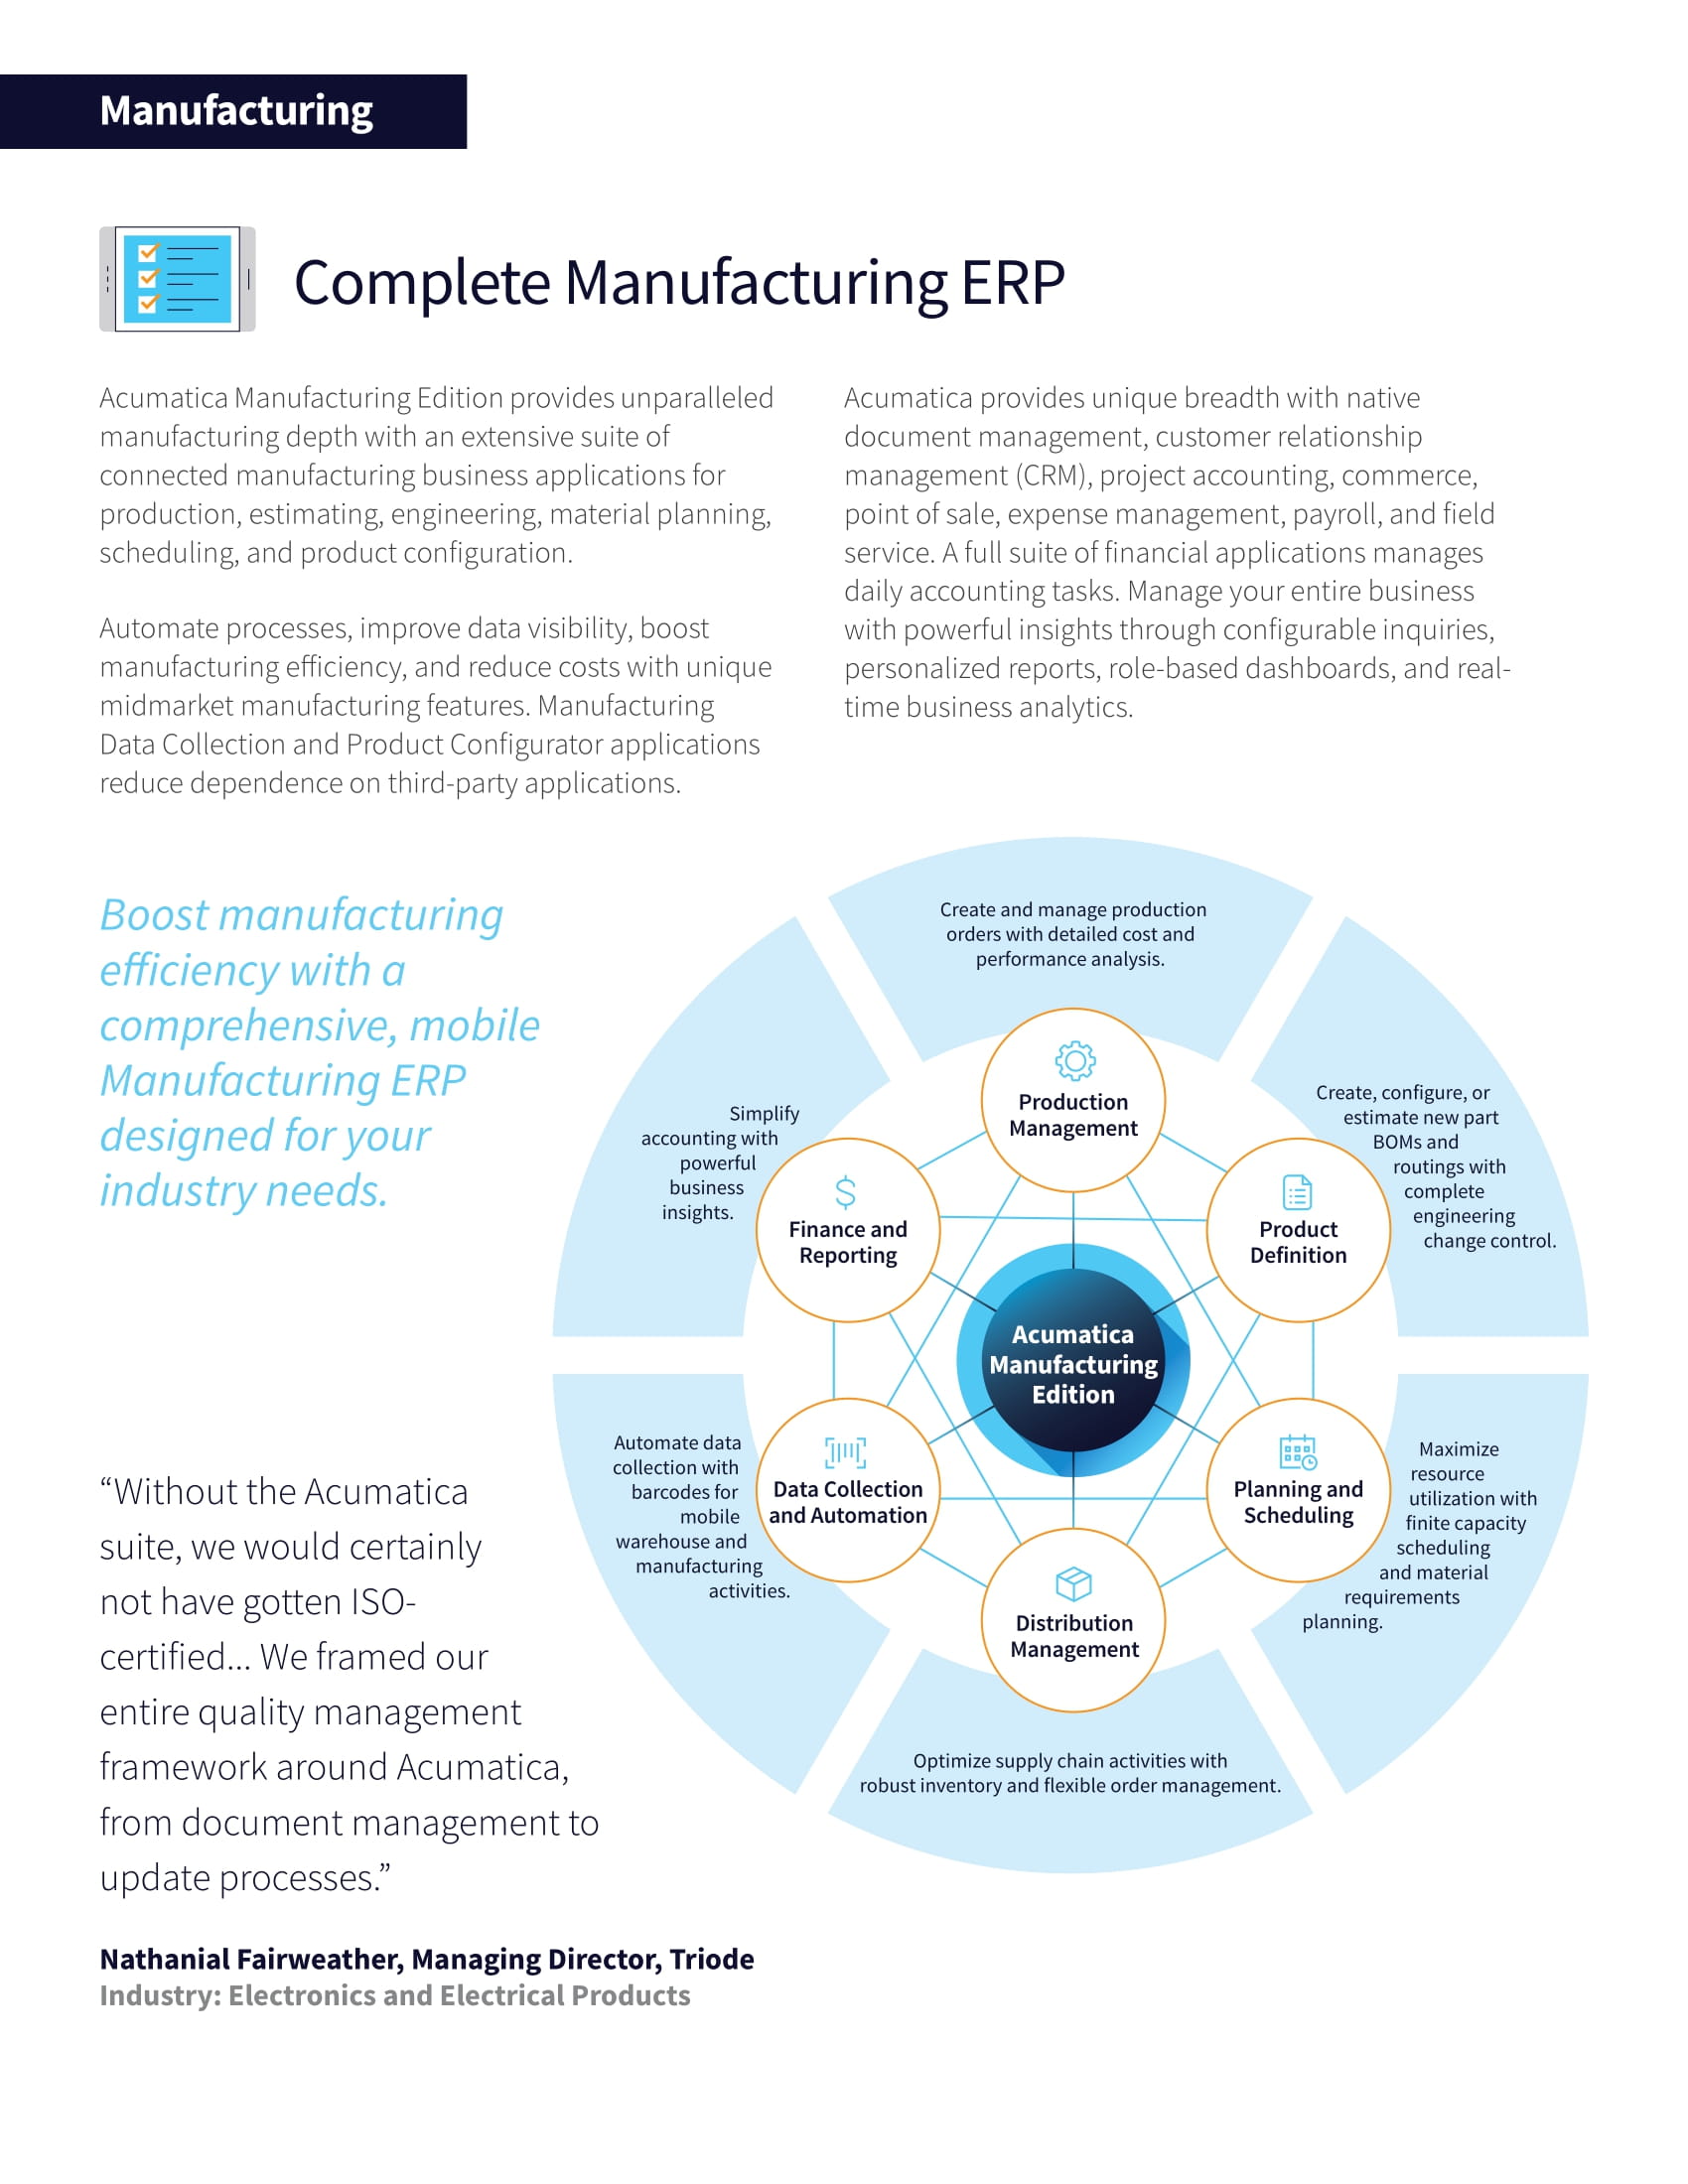 Manufacturing ERP Software That’s Designed to Grow Your Revenue—Not Your Headcount, page 1